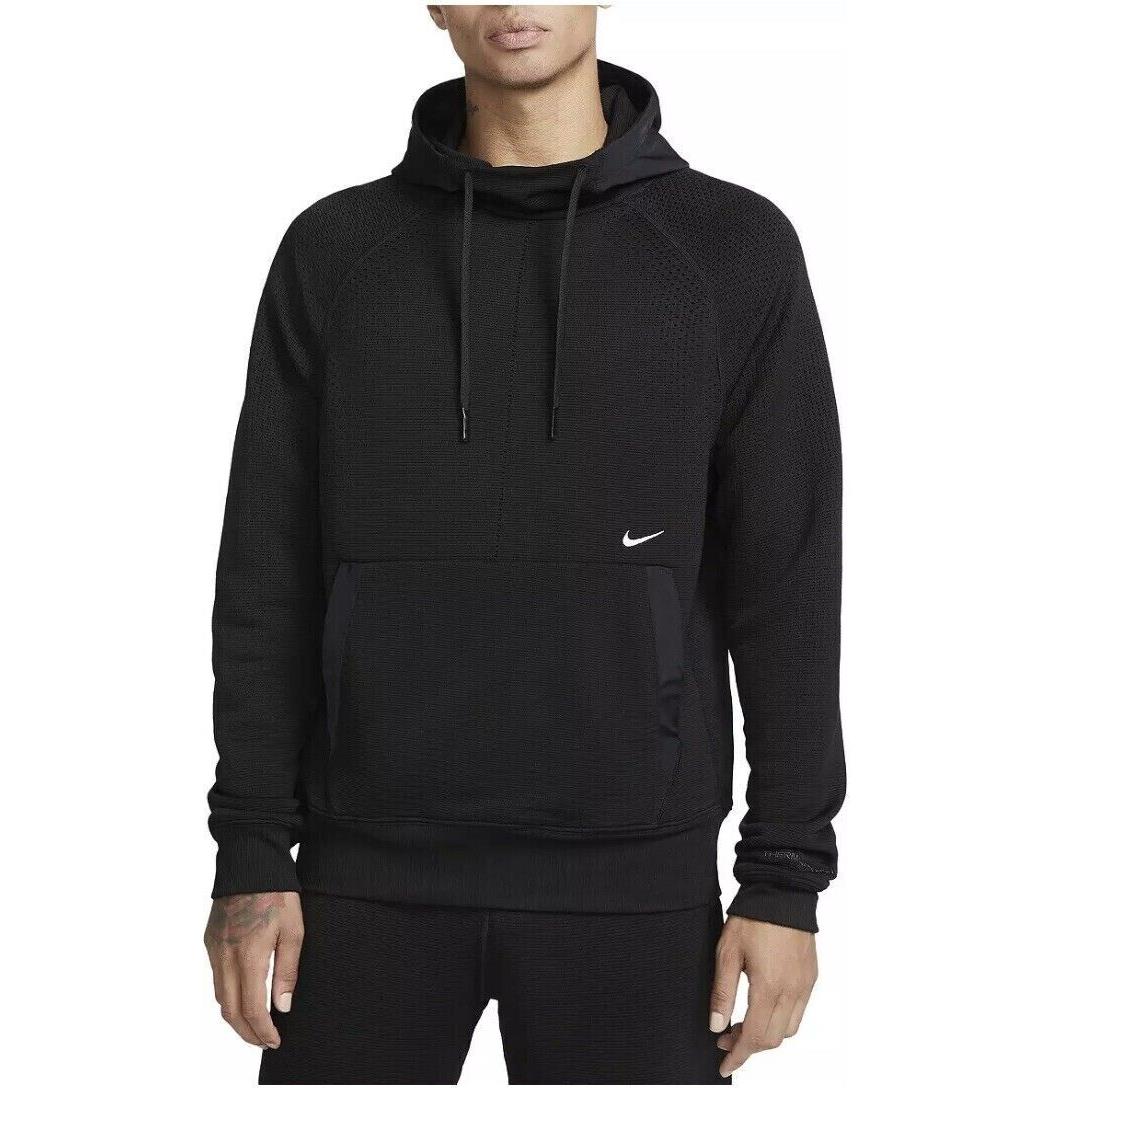 Nike Therma-fit Black Adv A.p.s. Men`s S Fleece Fitness Hoodie DQ4850-010